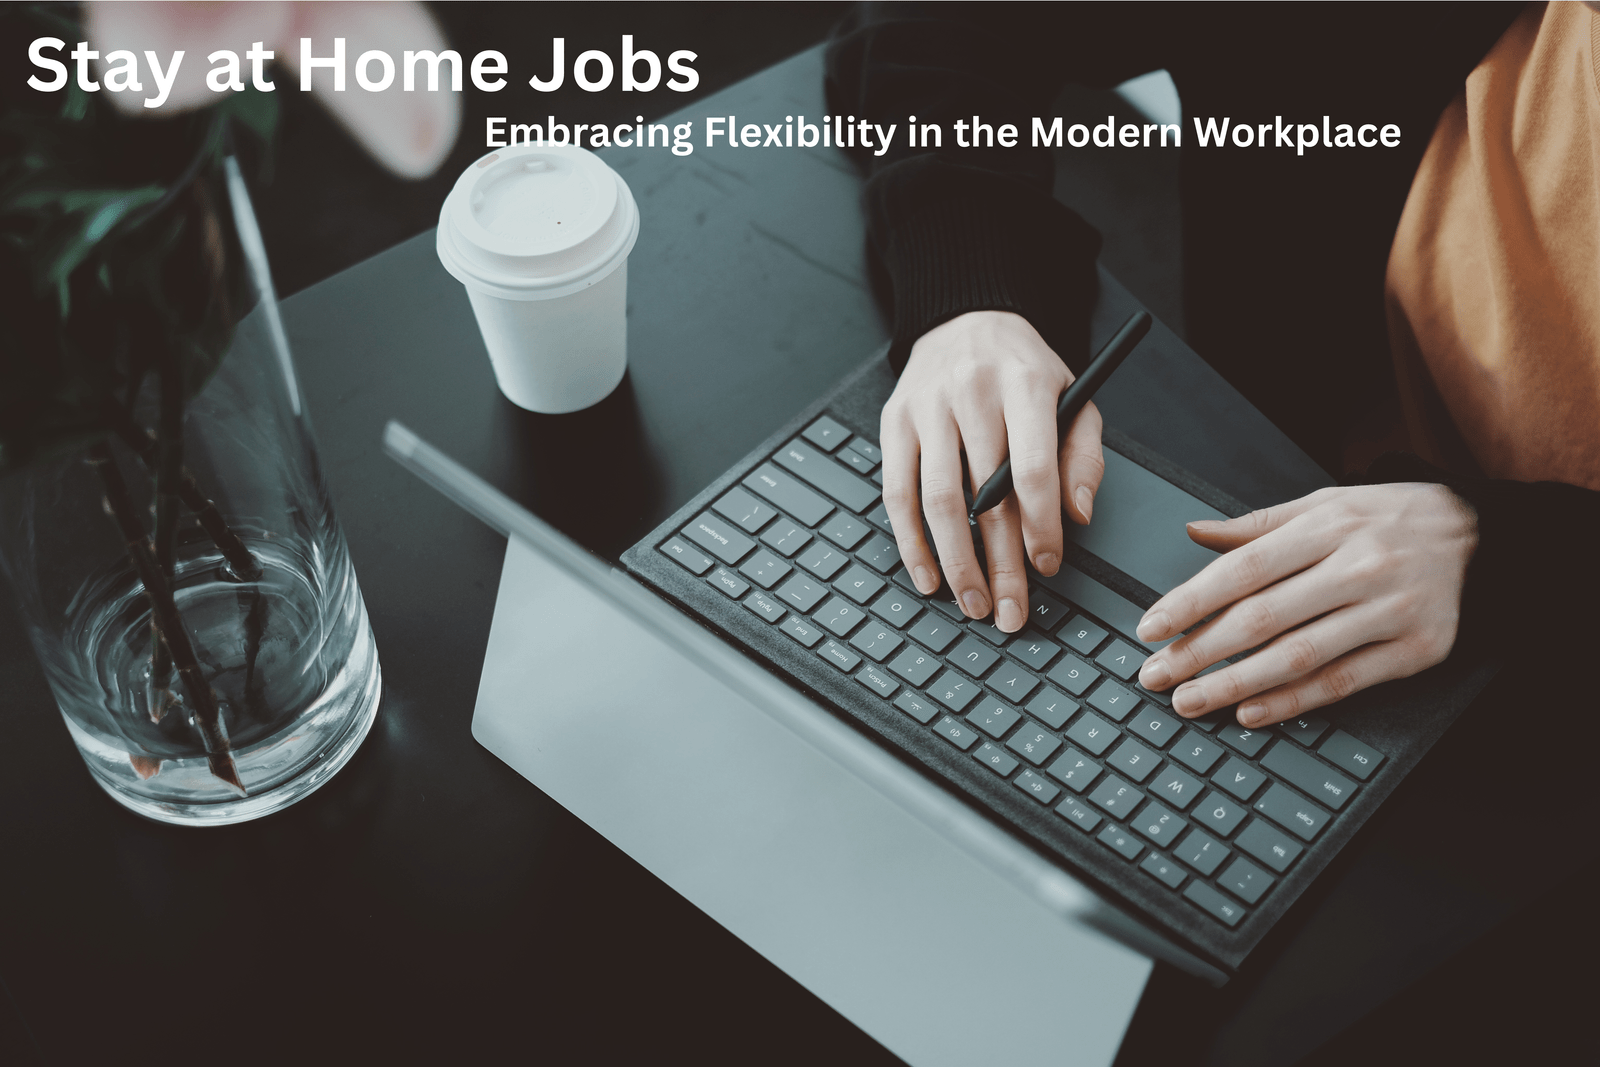 Stay at Home jobs